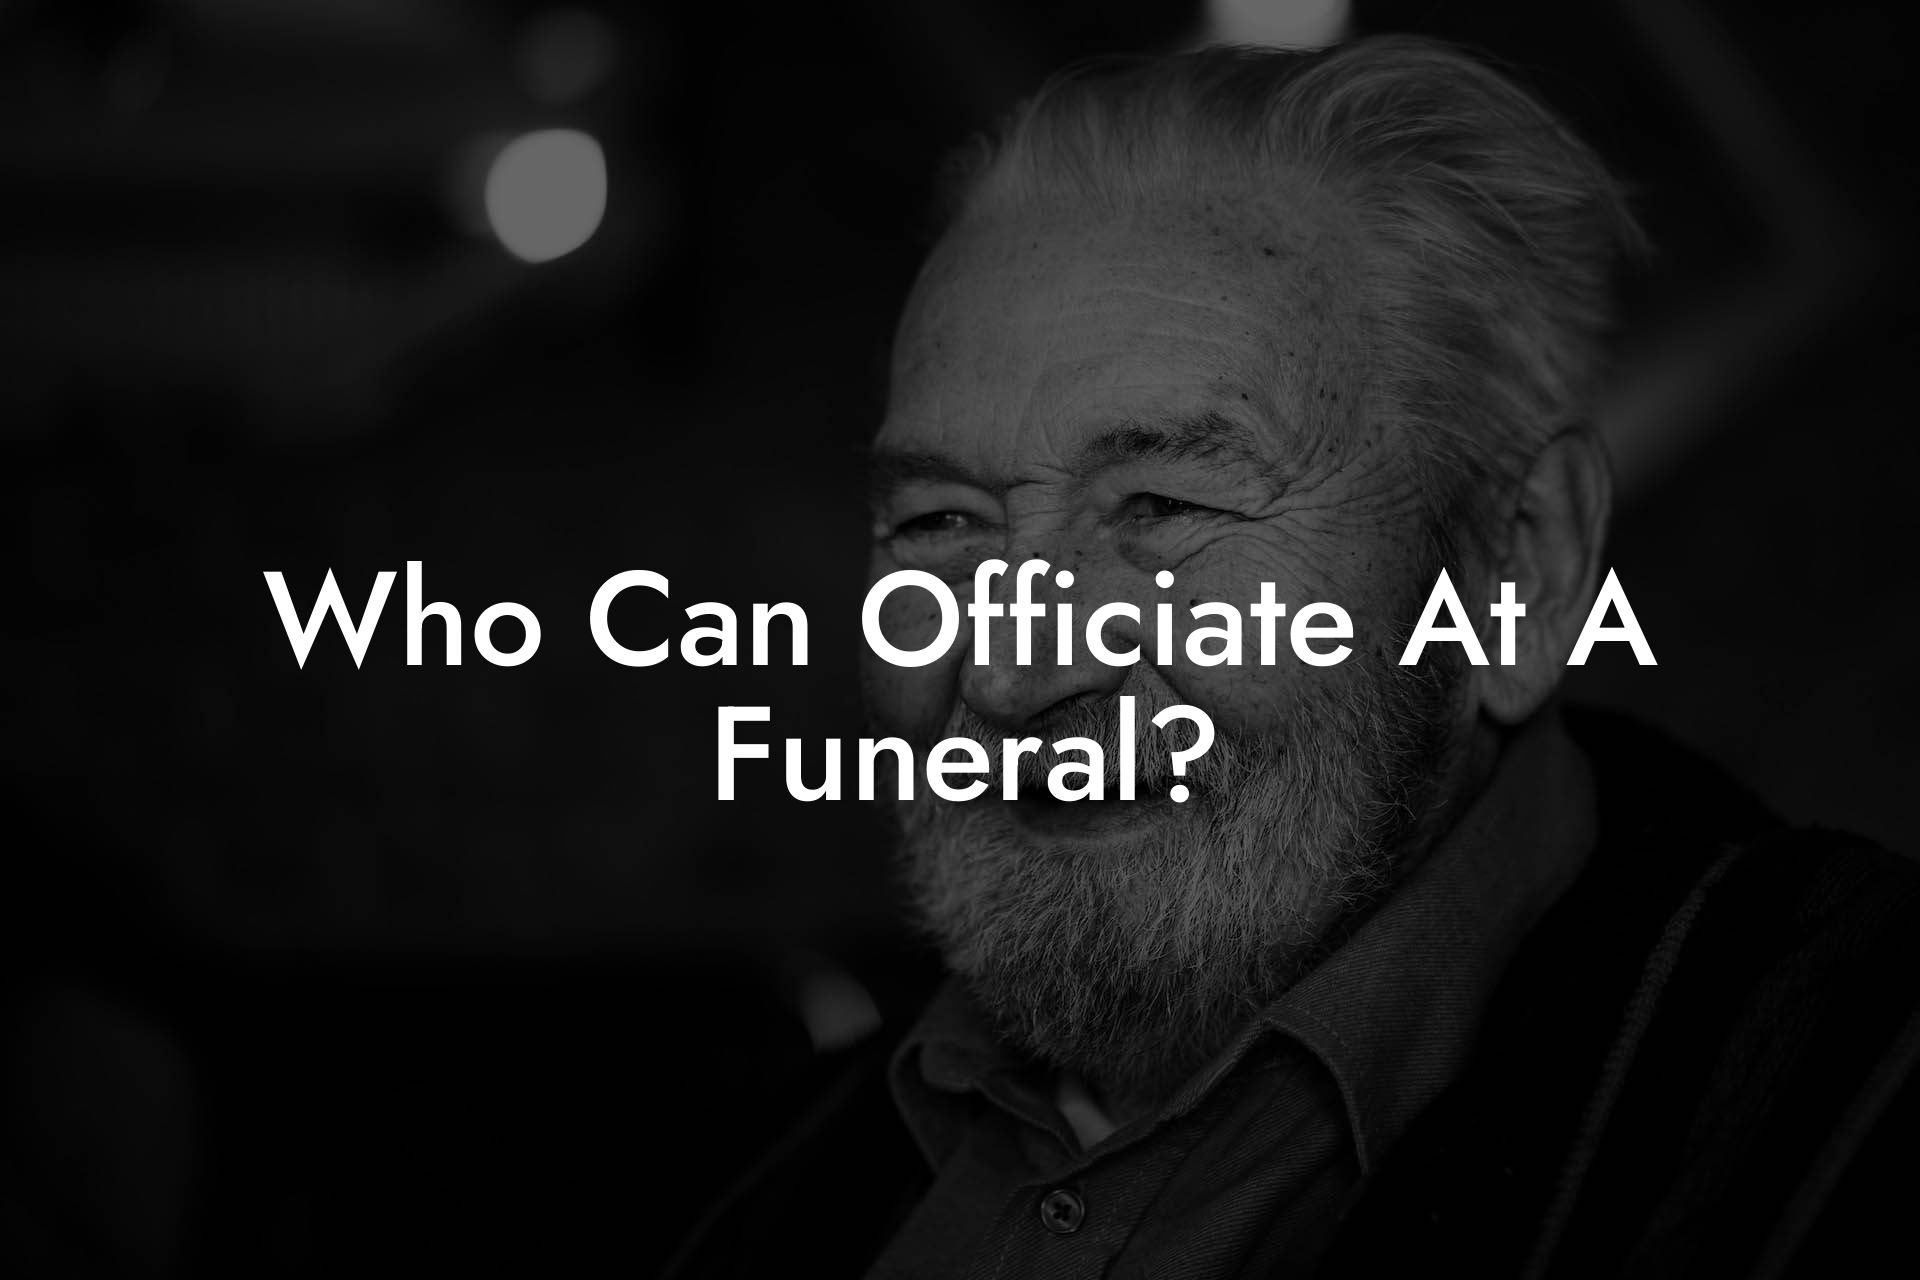 Who Can Officiate At A Funeral?